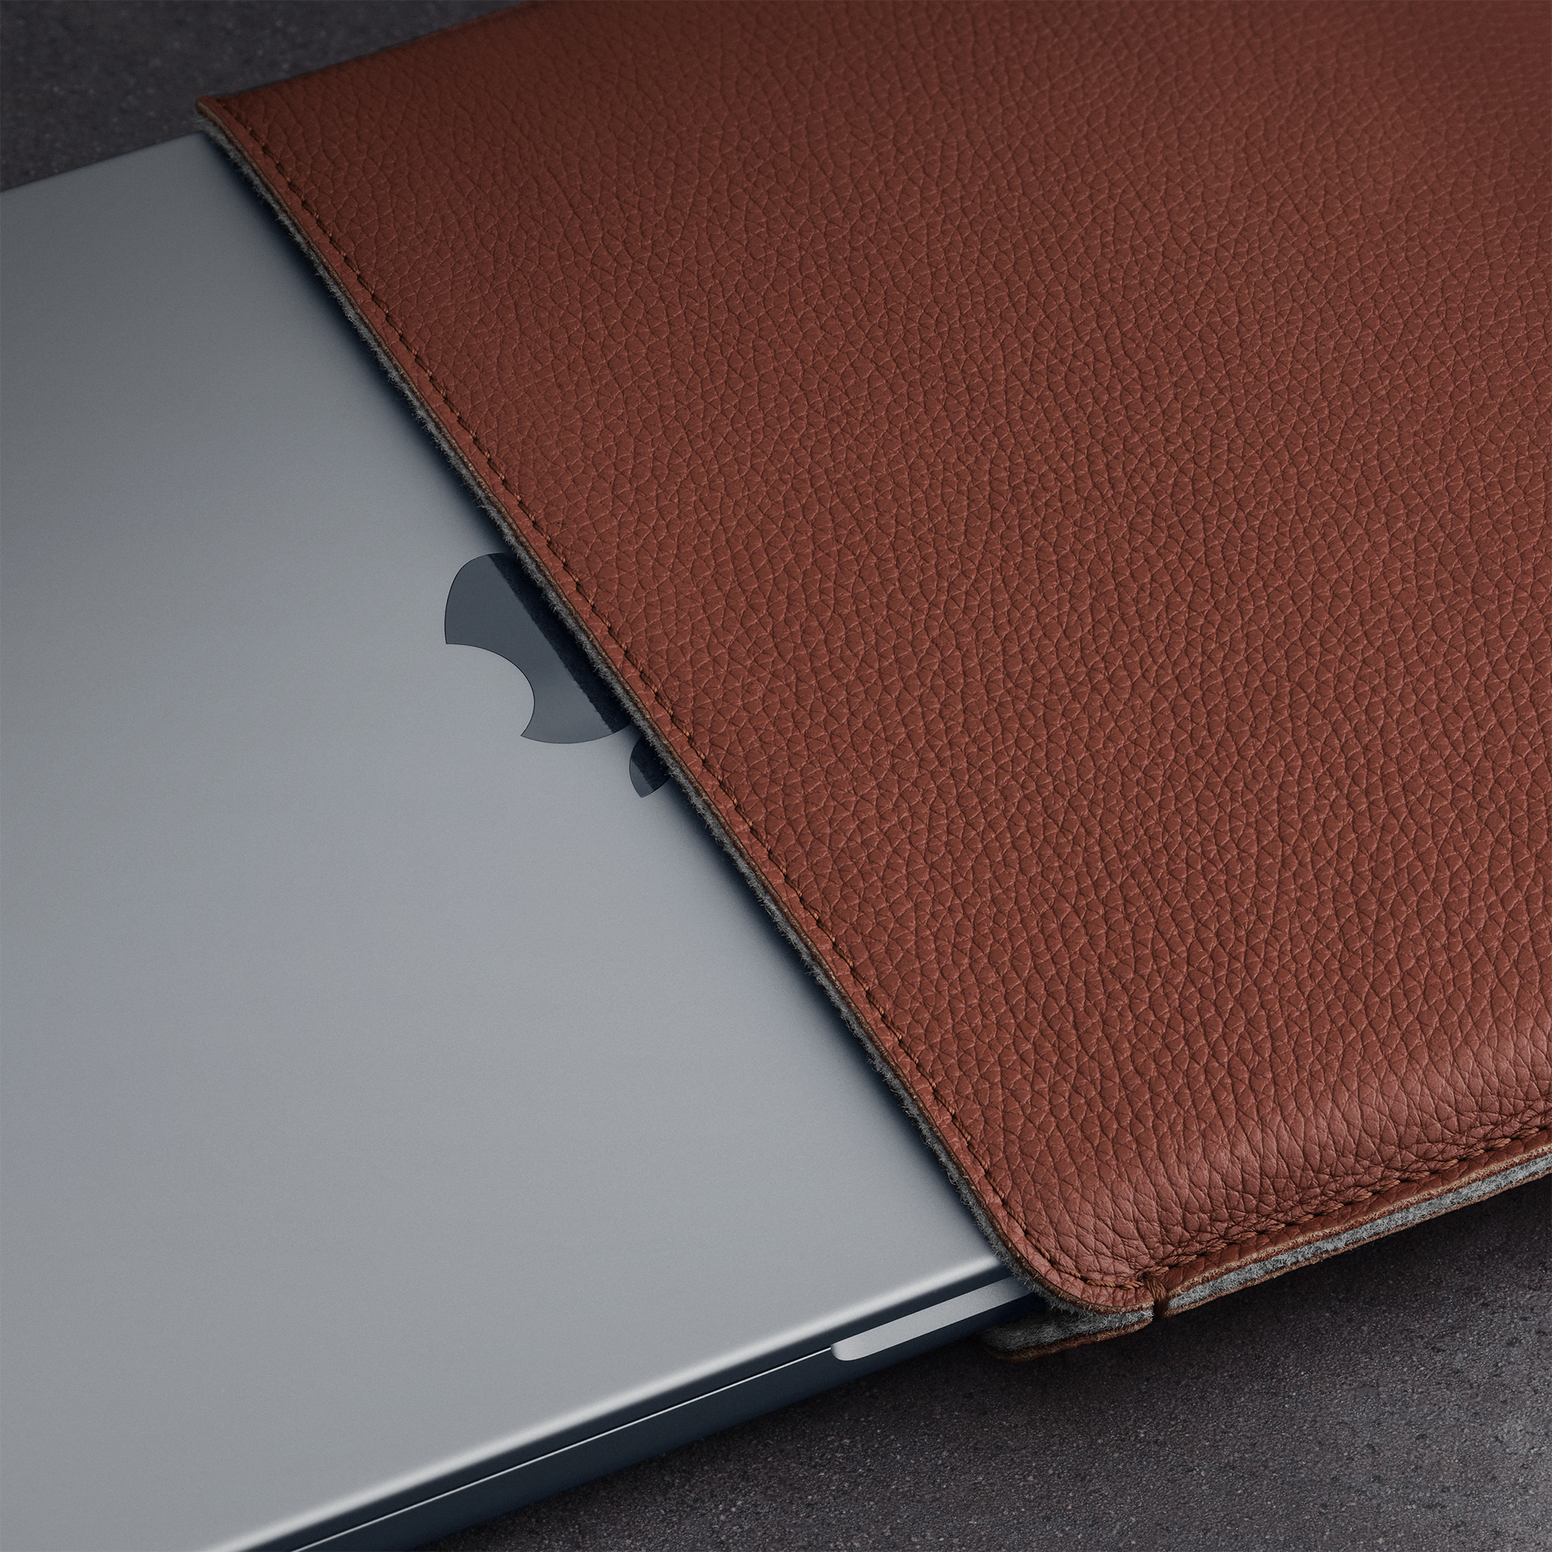 WOOLNUT Leather Sleeve for 14-inch MacBook Pro - Cognac